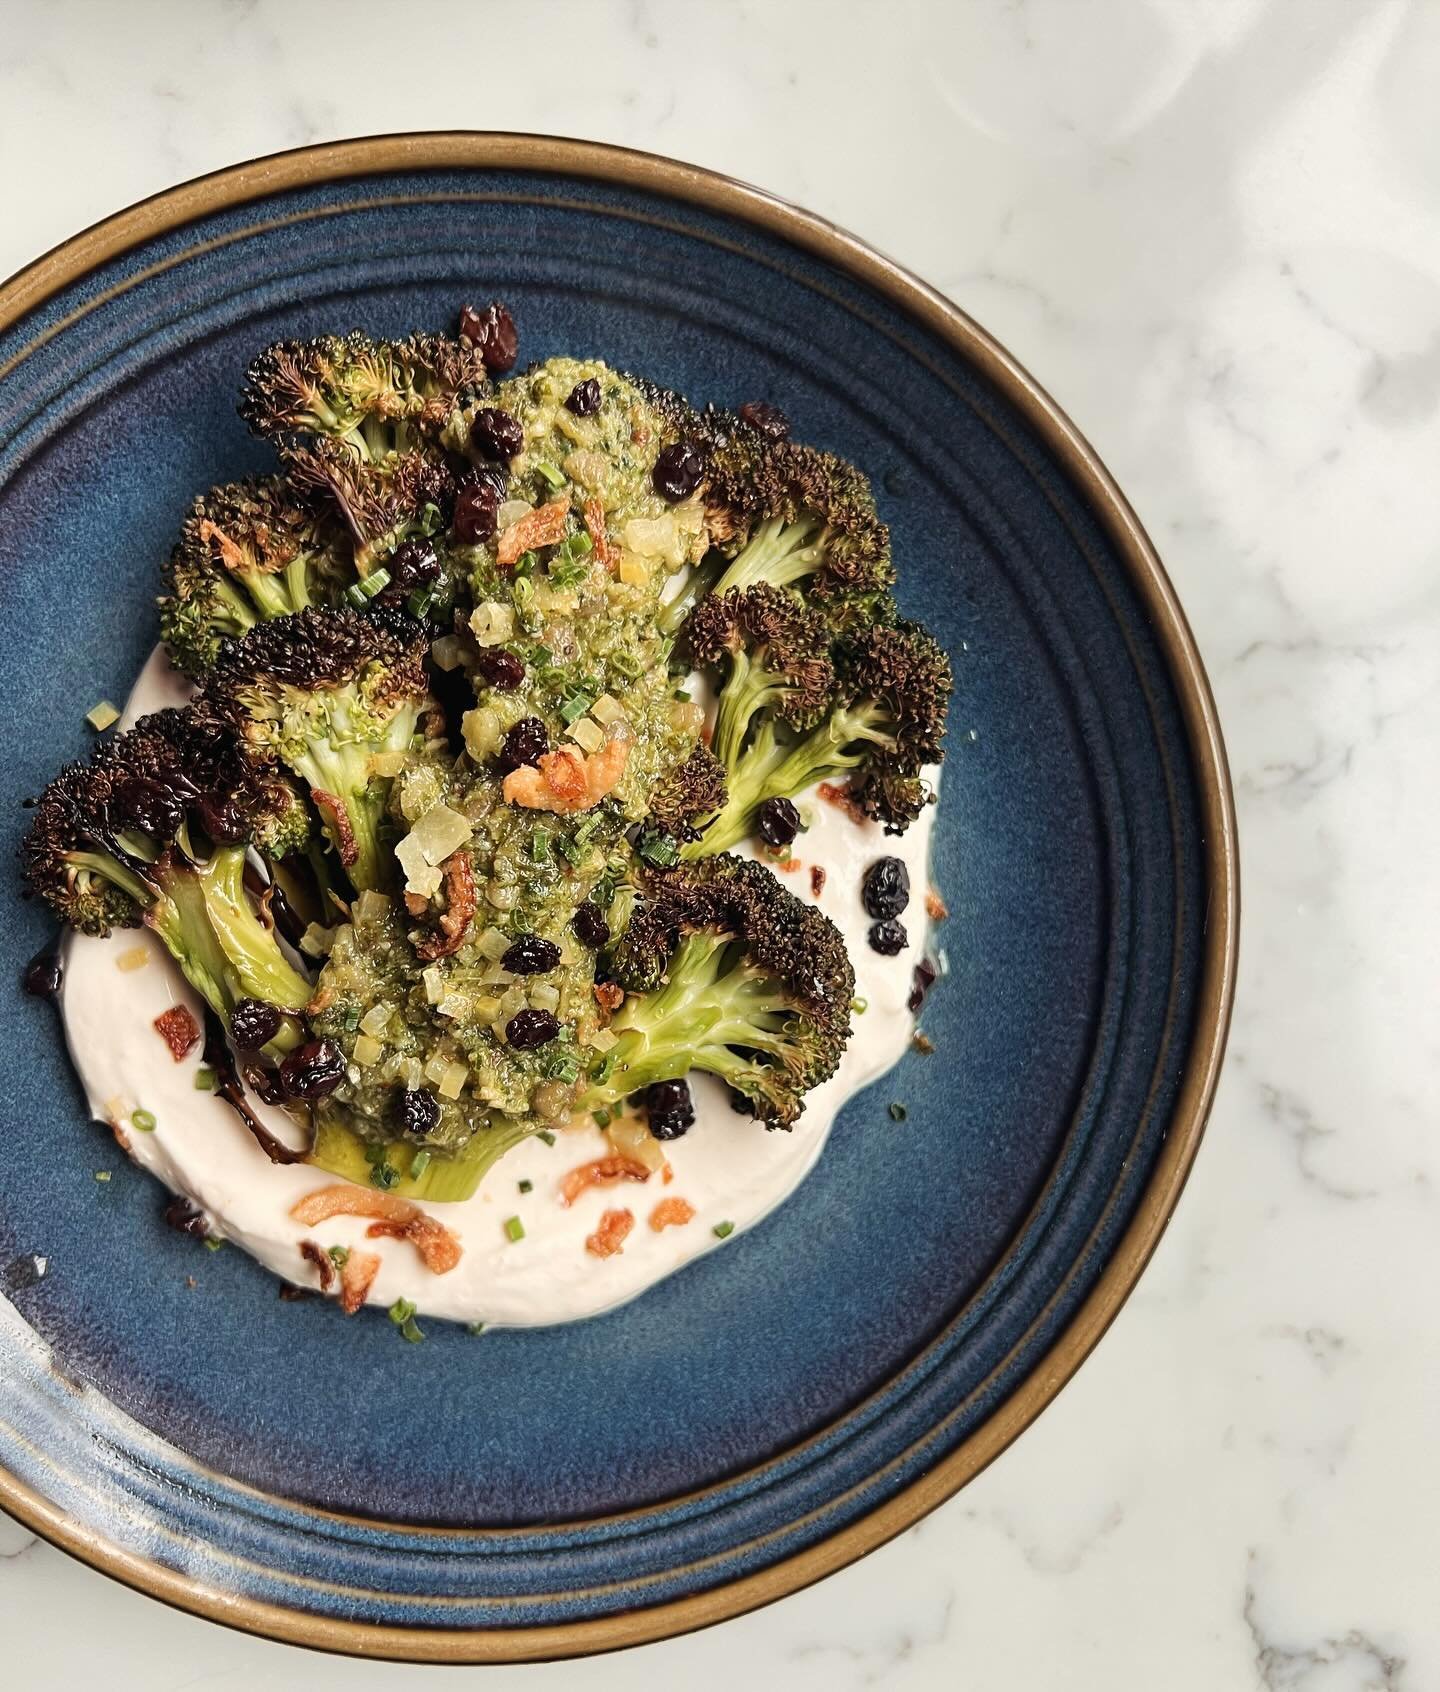 Roasted broccoli with miso cream, sunflower seed pesto, pickled currants &amp; crispy spring onions

We couldn't love this dish anymore honestly....
Nice work chef!!!! 

#broccoligoalz #eatyourgreens #bostonfoodies #thisishowweroll #nath&aacute;liewi